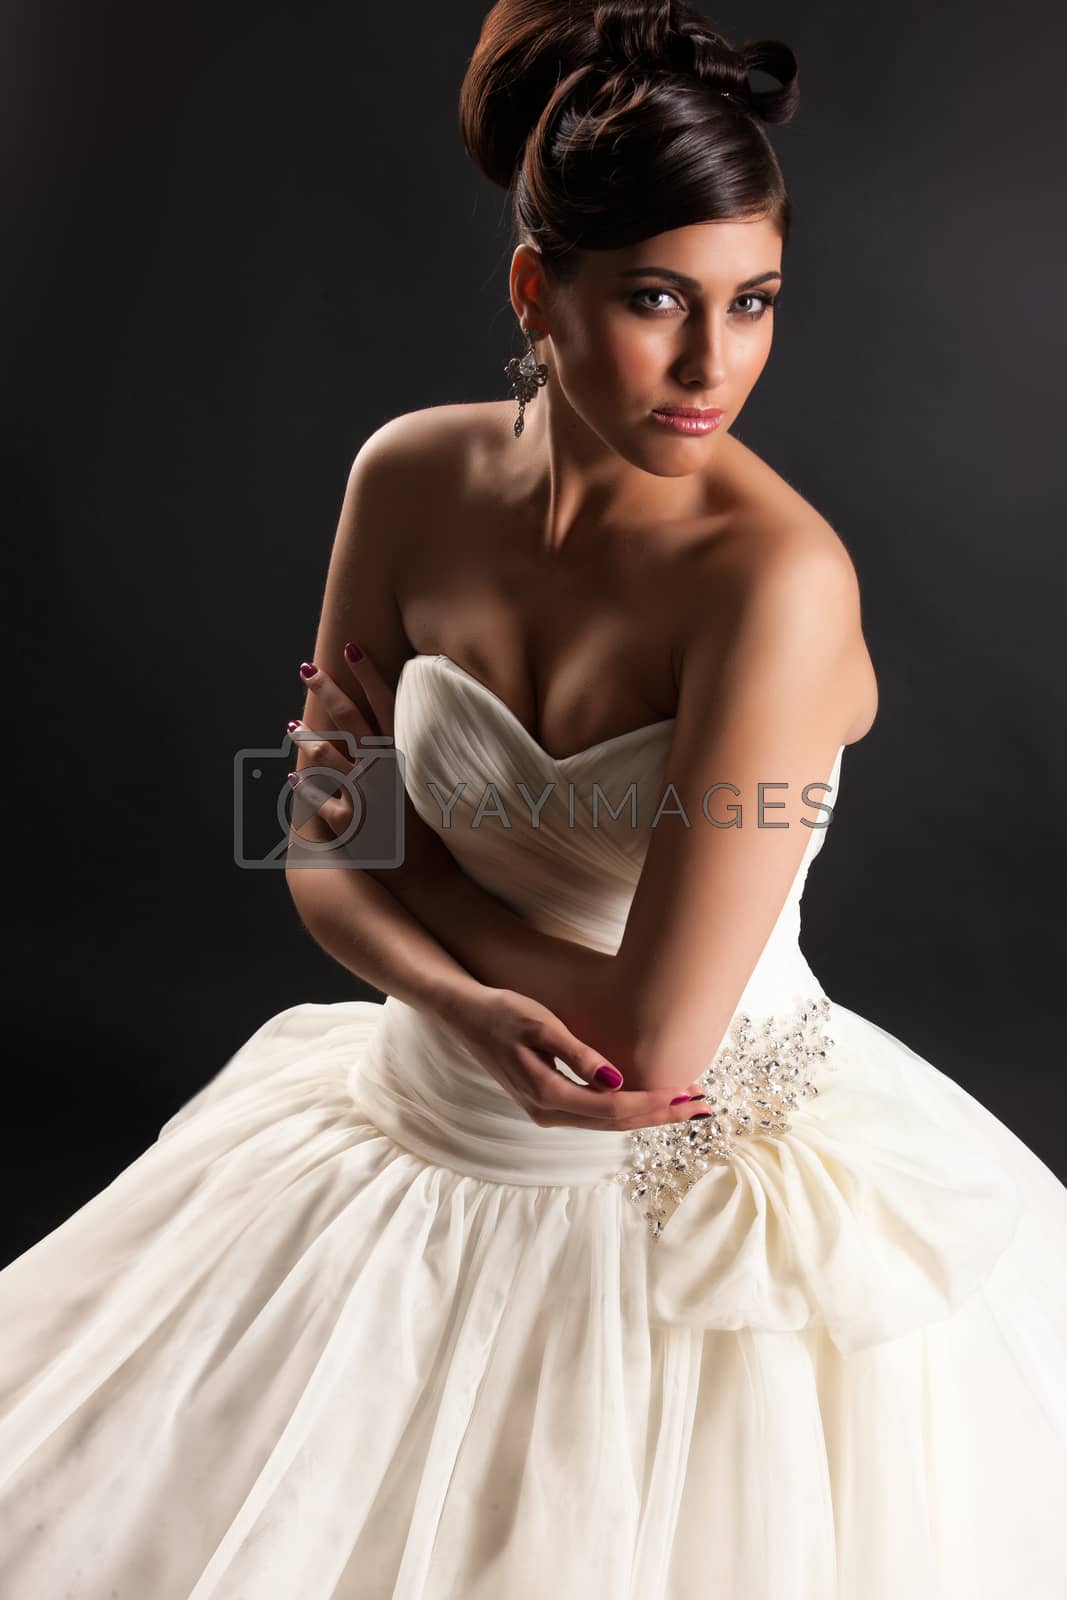 Royalty free image of Young Beautiful Bride by Fotoskat